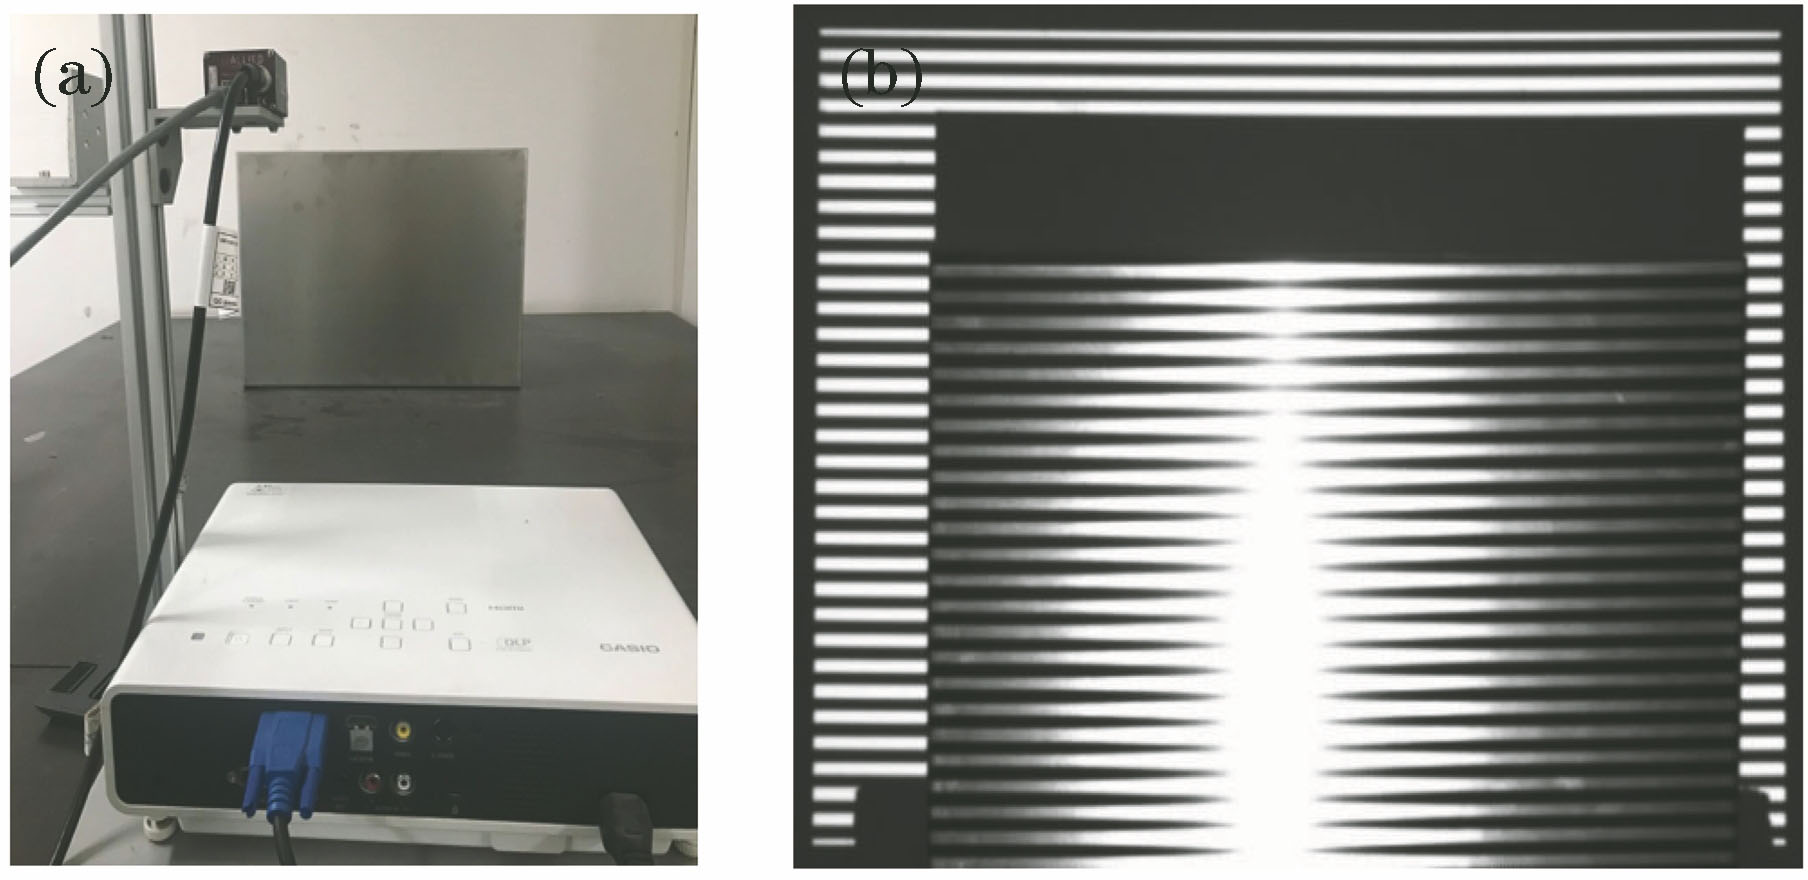 Experimental setup and results. (a) Scanning system; (b) deformed fringe of stainless steel plate in one frame time